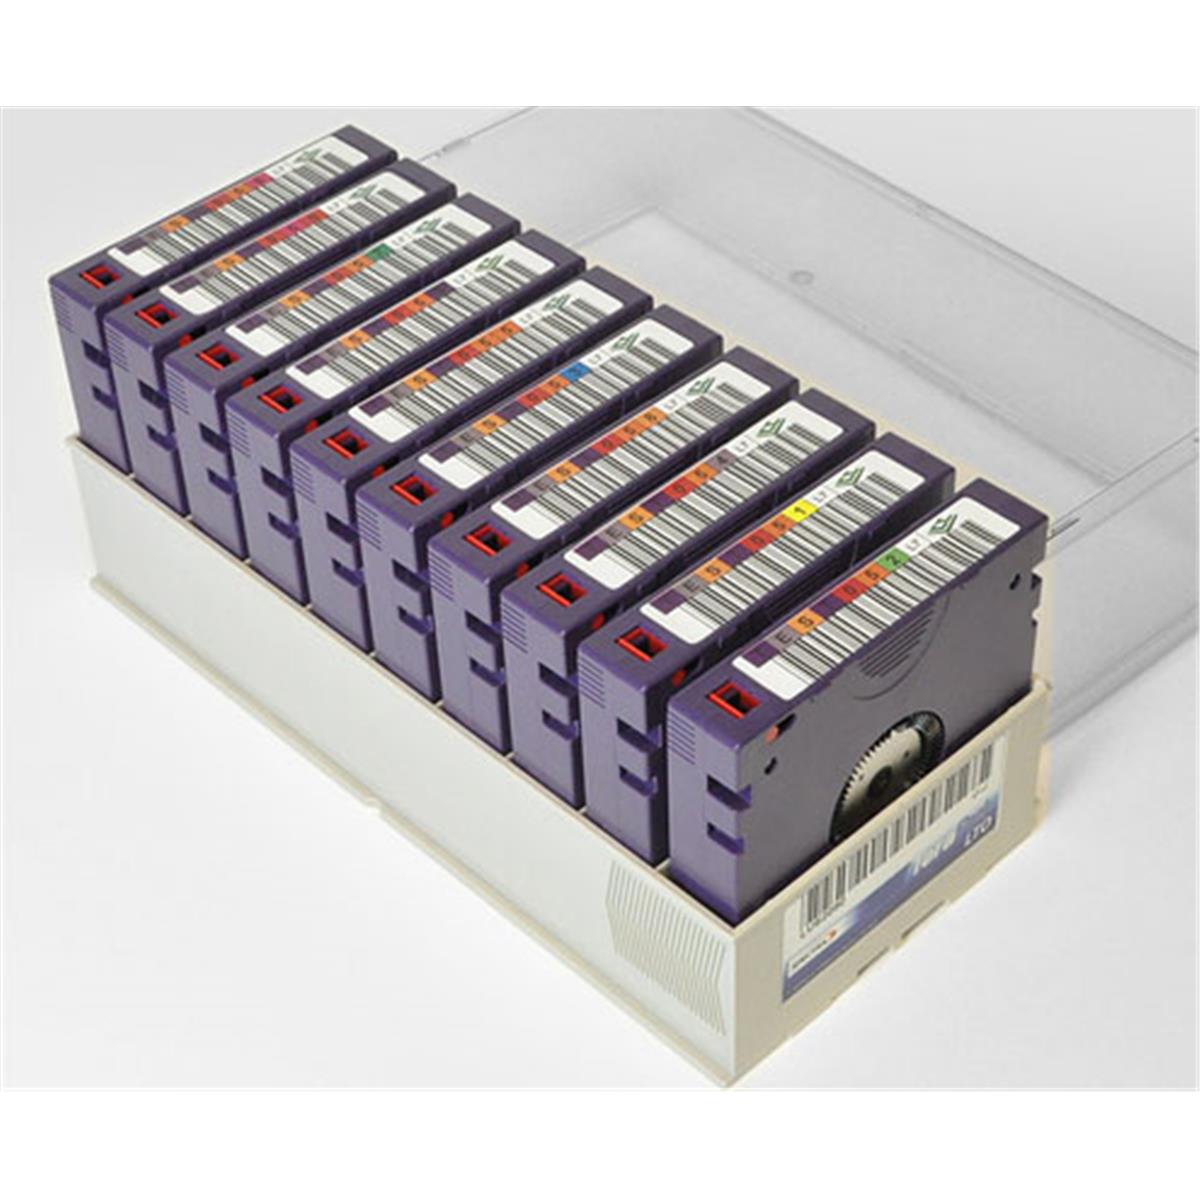 HPQ2078AN LTO - 8 Ultrium 30TB RW Non Labeled Library Data Cartridges with Cases